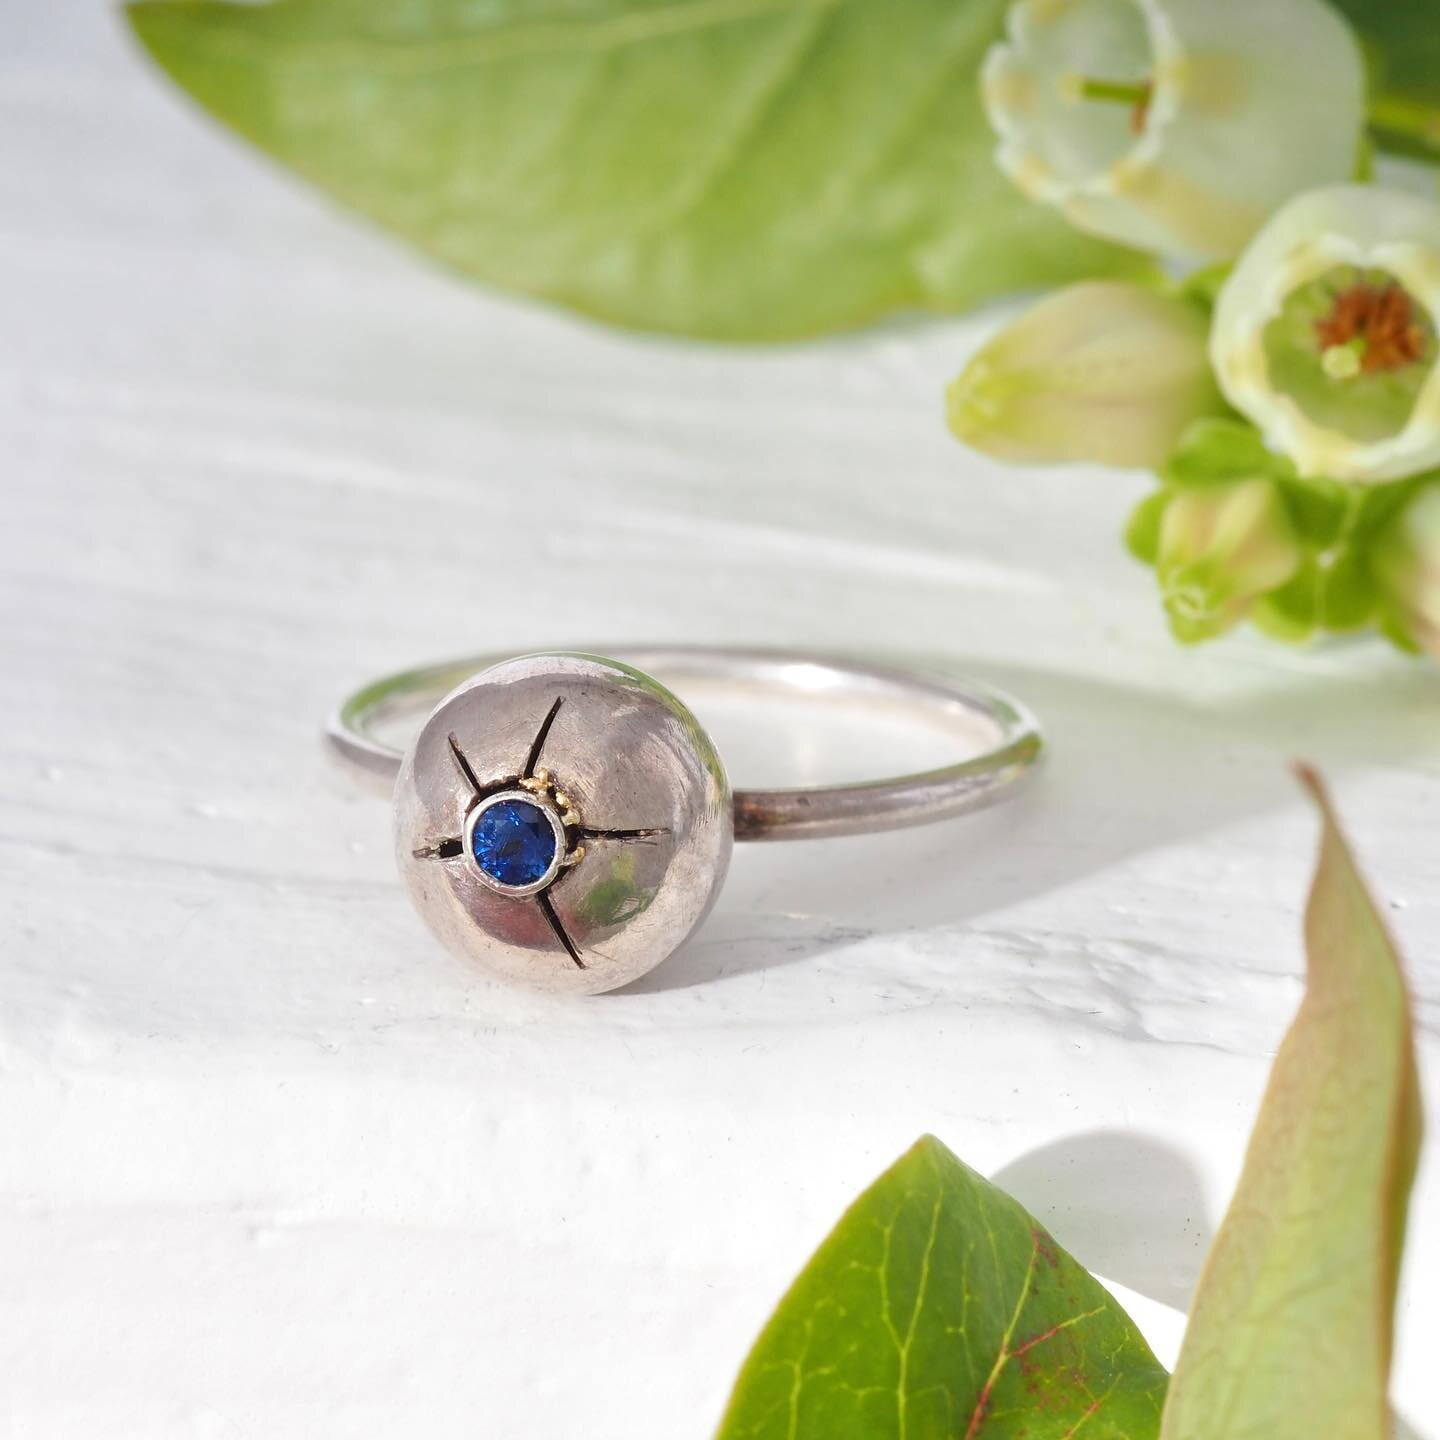 Mother&rsquo;s Day Made-In-Seattle gifts. Open Thursday, Friday, Saturday 11-5. Blueberry ring is photographed with blueberry flowers &amp; leaves. Come in for a visit, we&rsquo;ve got lots of fun items&hellip; a few cool vintage pieces as well. #mot